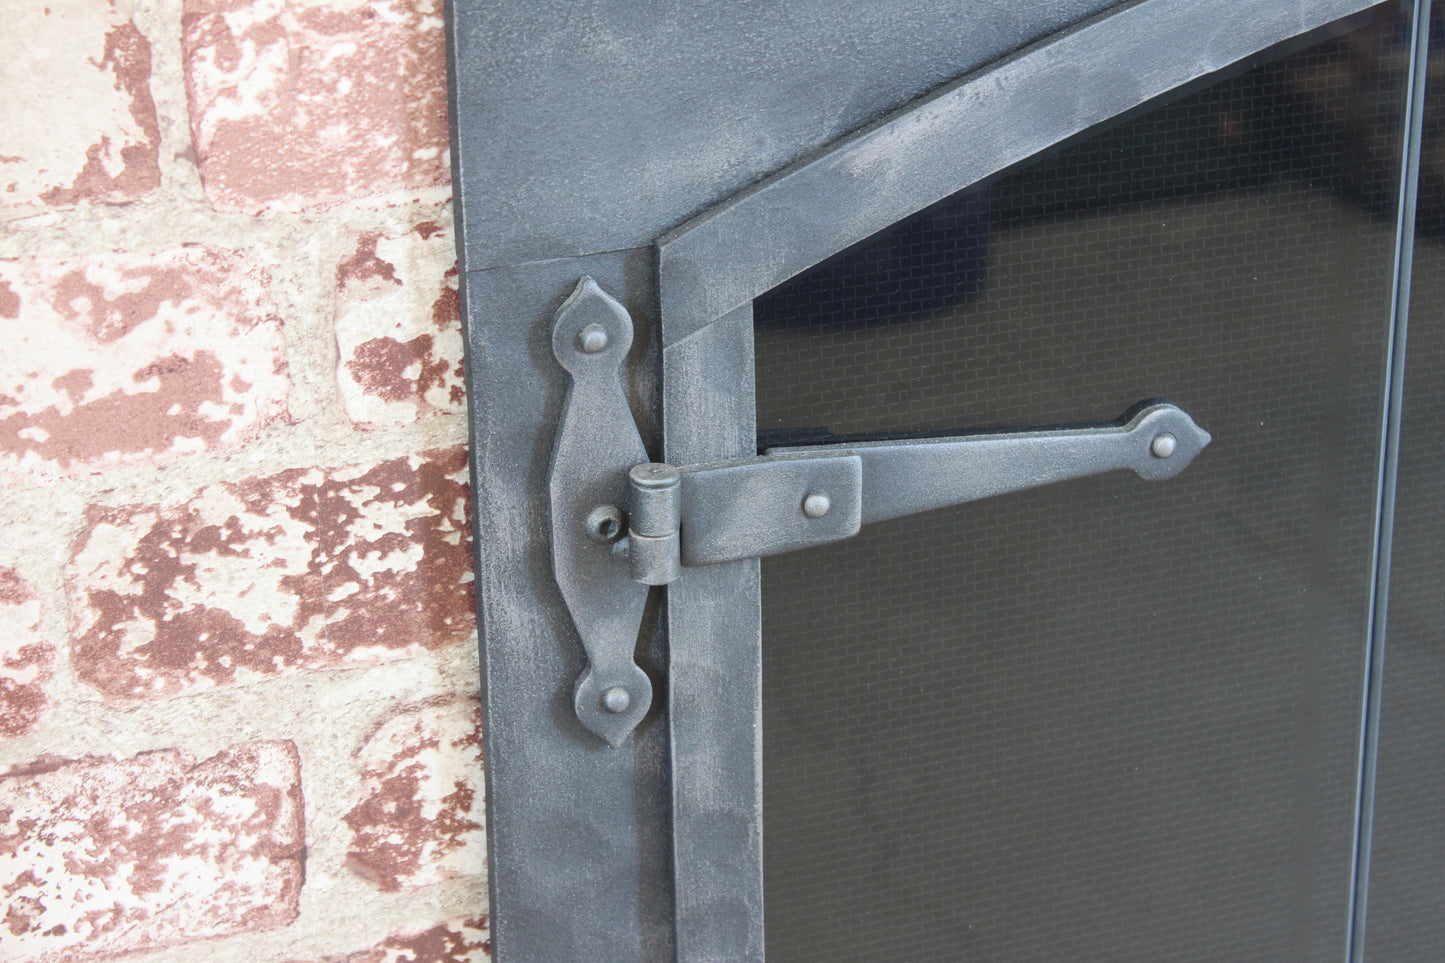 Forged Iron Fireplace Door By Stoll